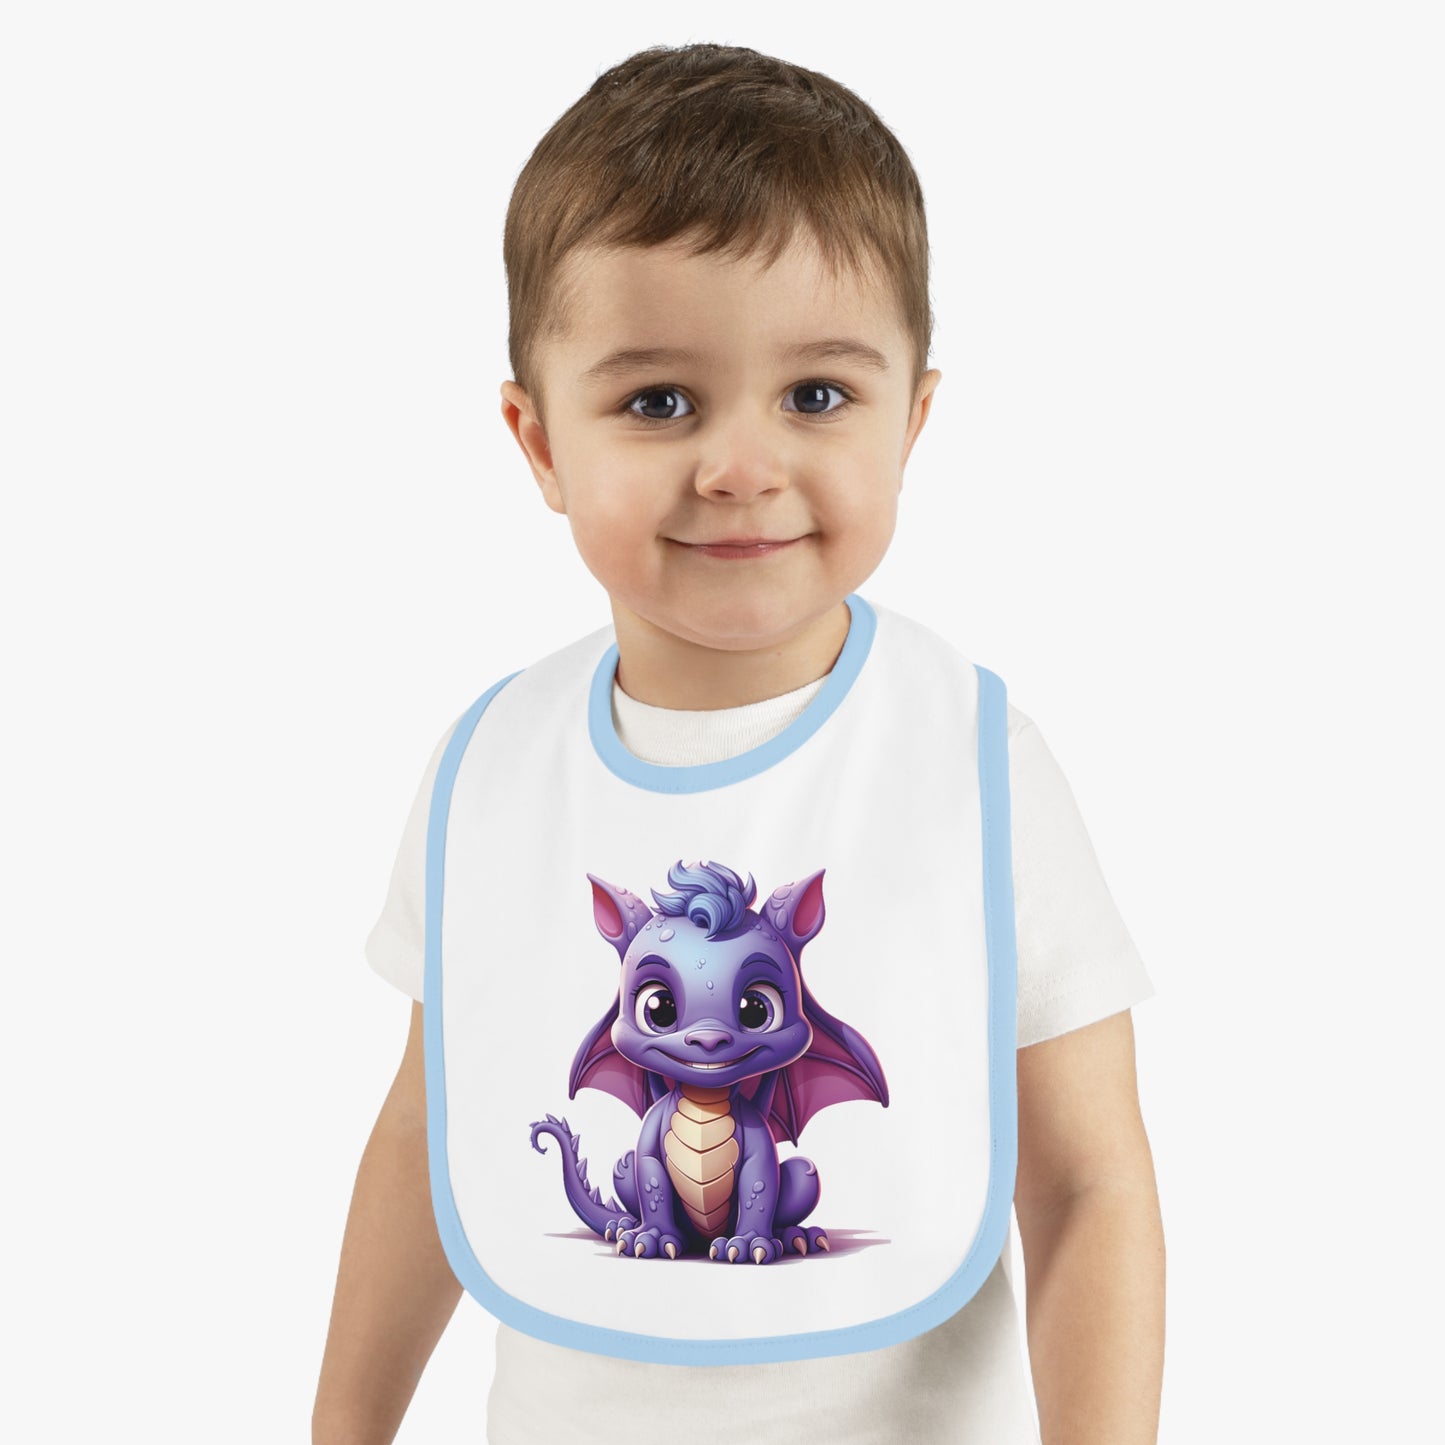 A white 100% cotton baby bib trimmed in blue - with a purple baby Happy dragon in the center - a large bib super cute.